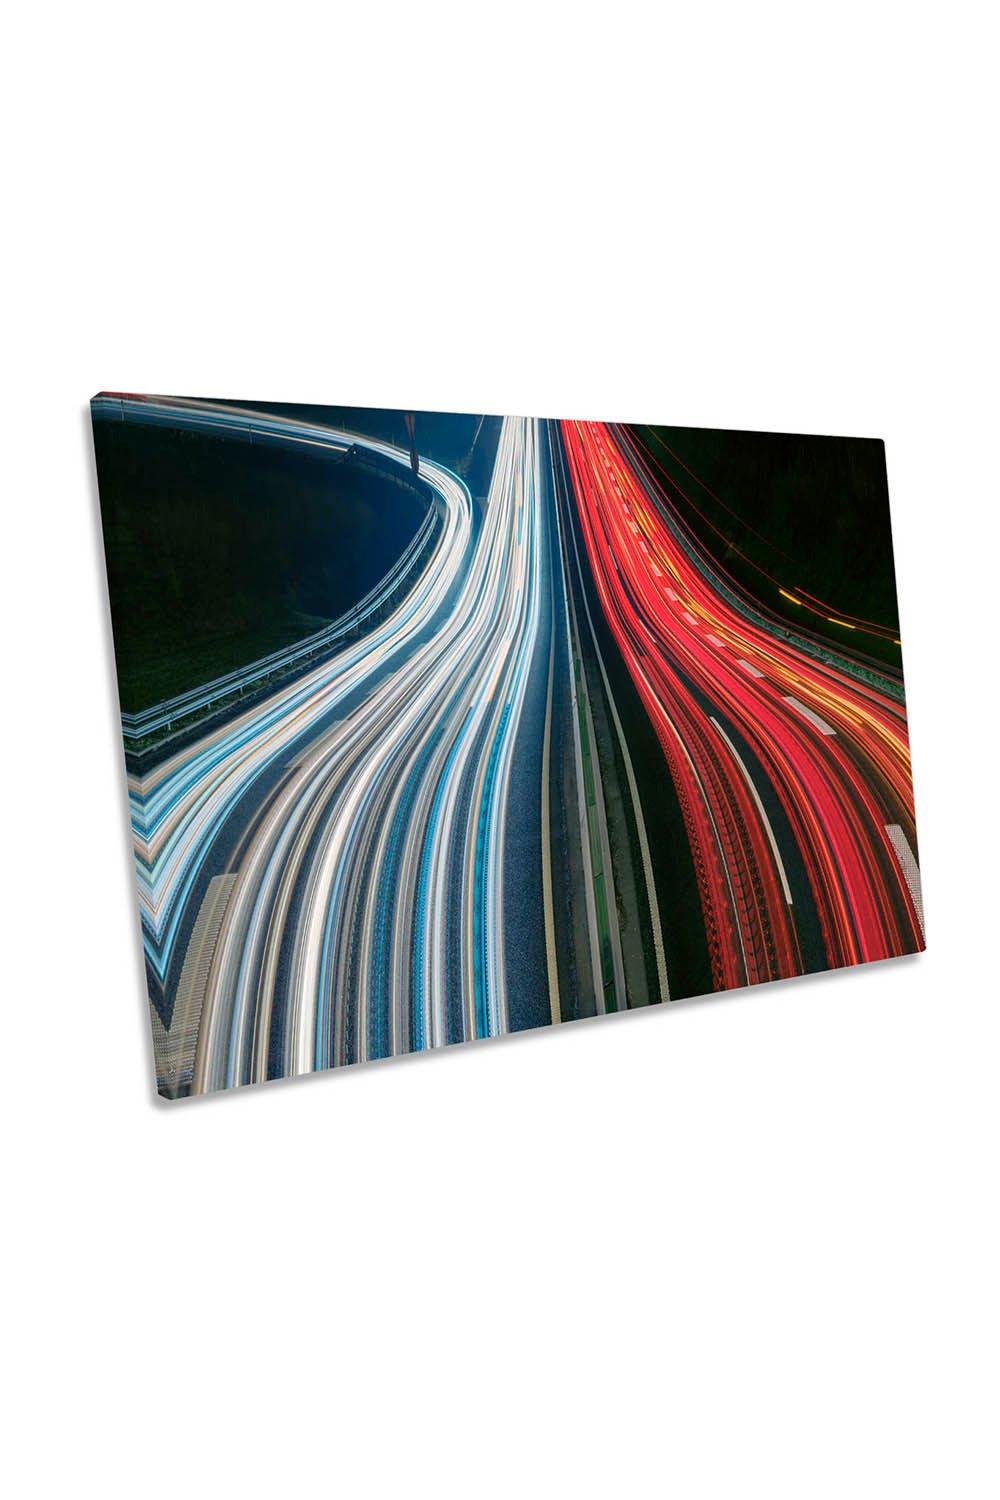 Light Up the Darkness Traffic Road Abstract Canvas Wall Art Picture Print